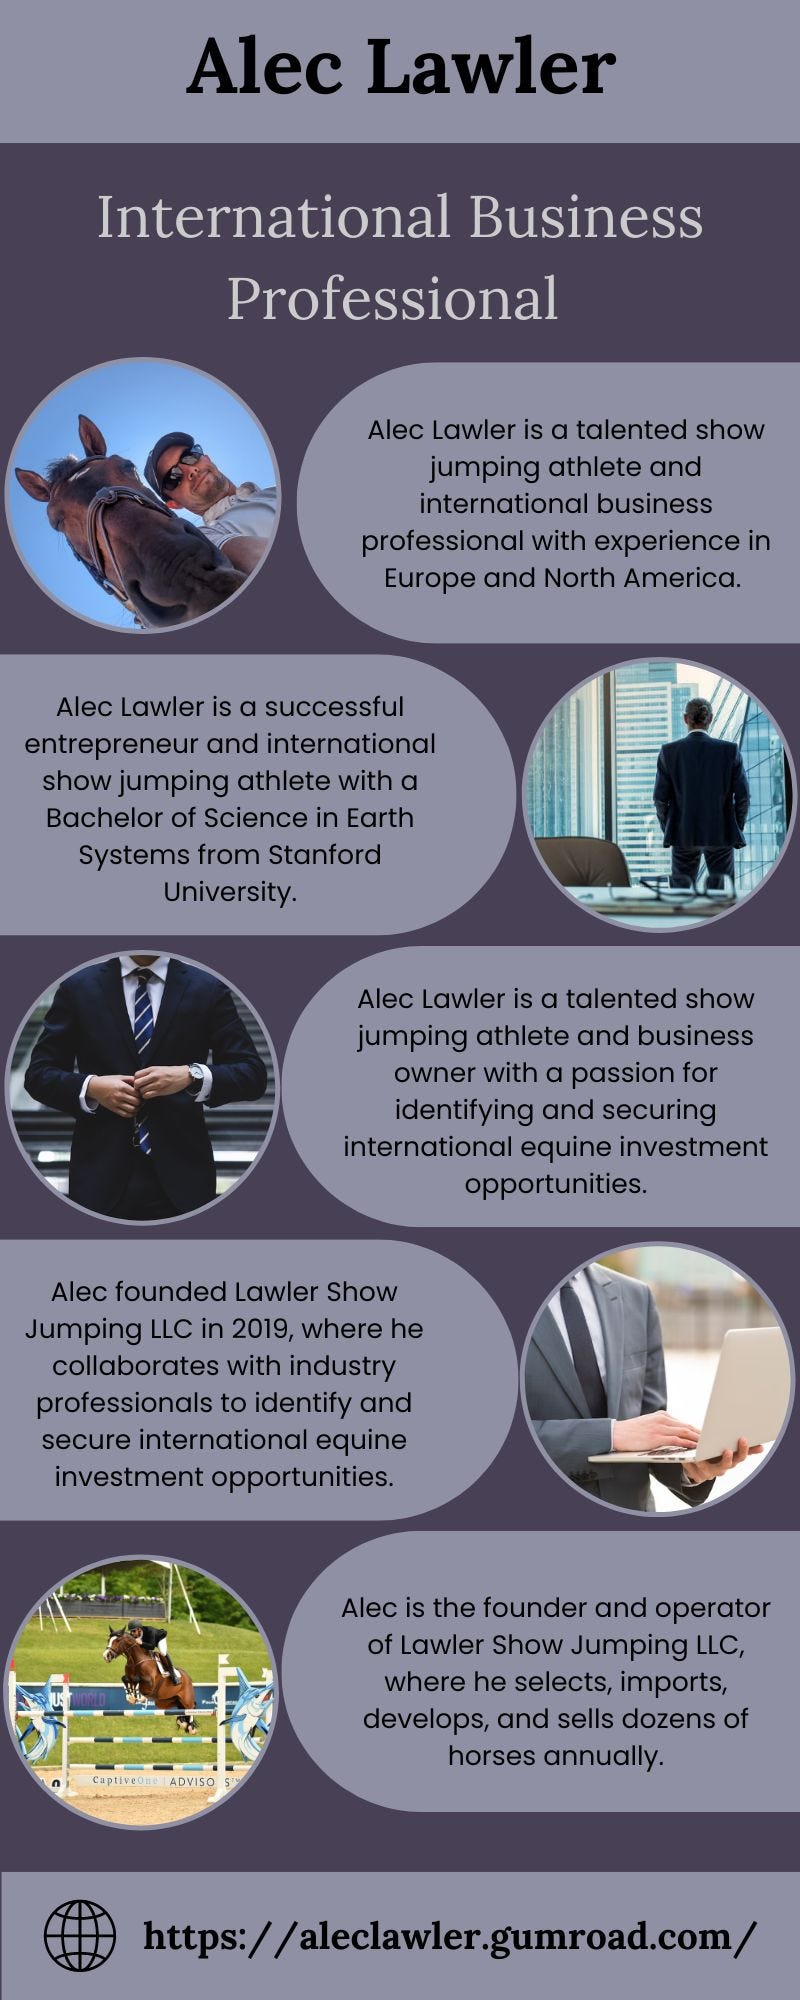 Alec Lawler is a talented show jumping athlete and international business professional with experience in Europe and North America.